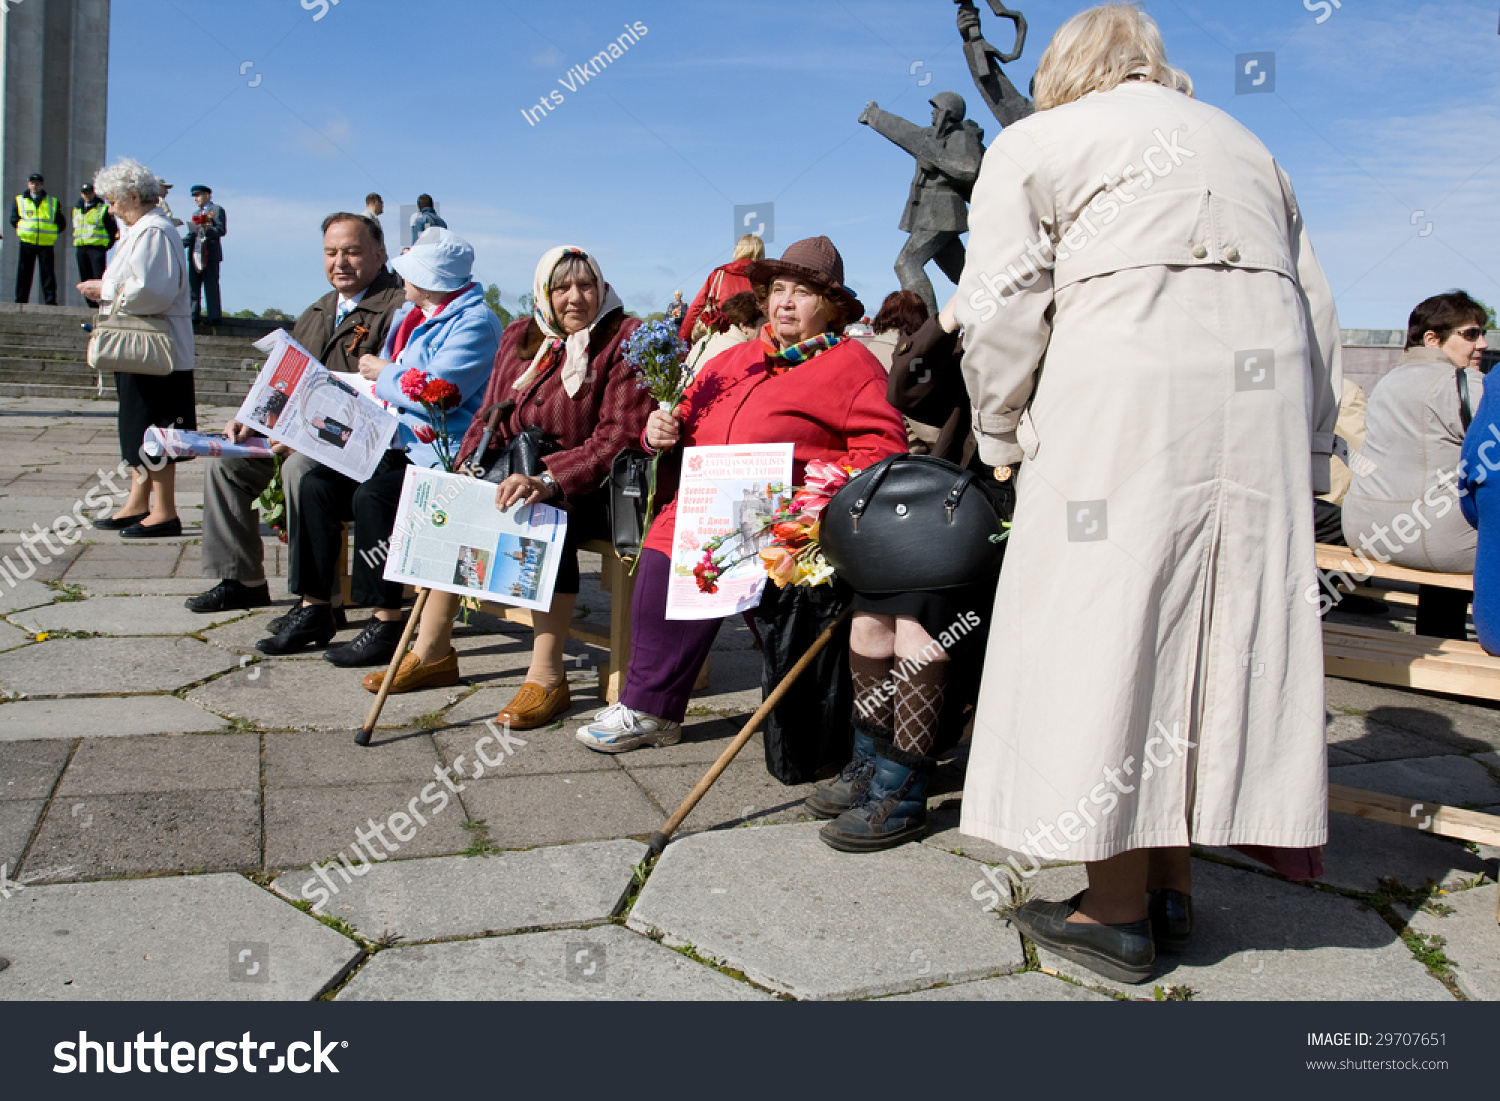 Image result for latvia old women